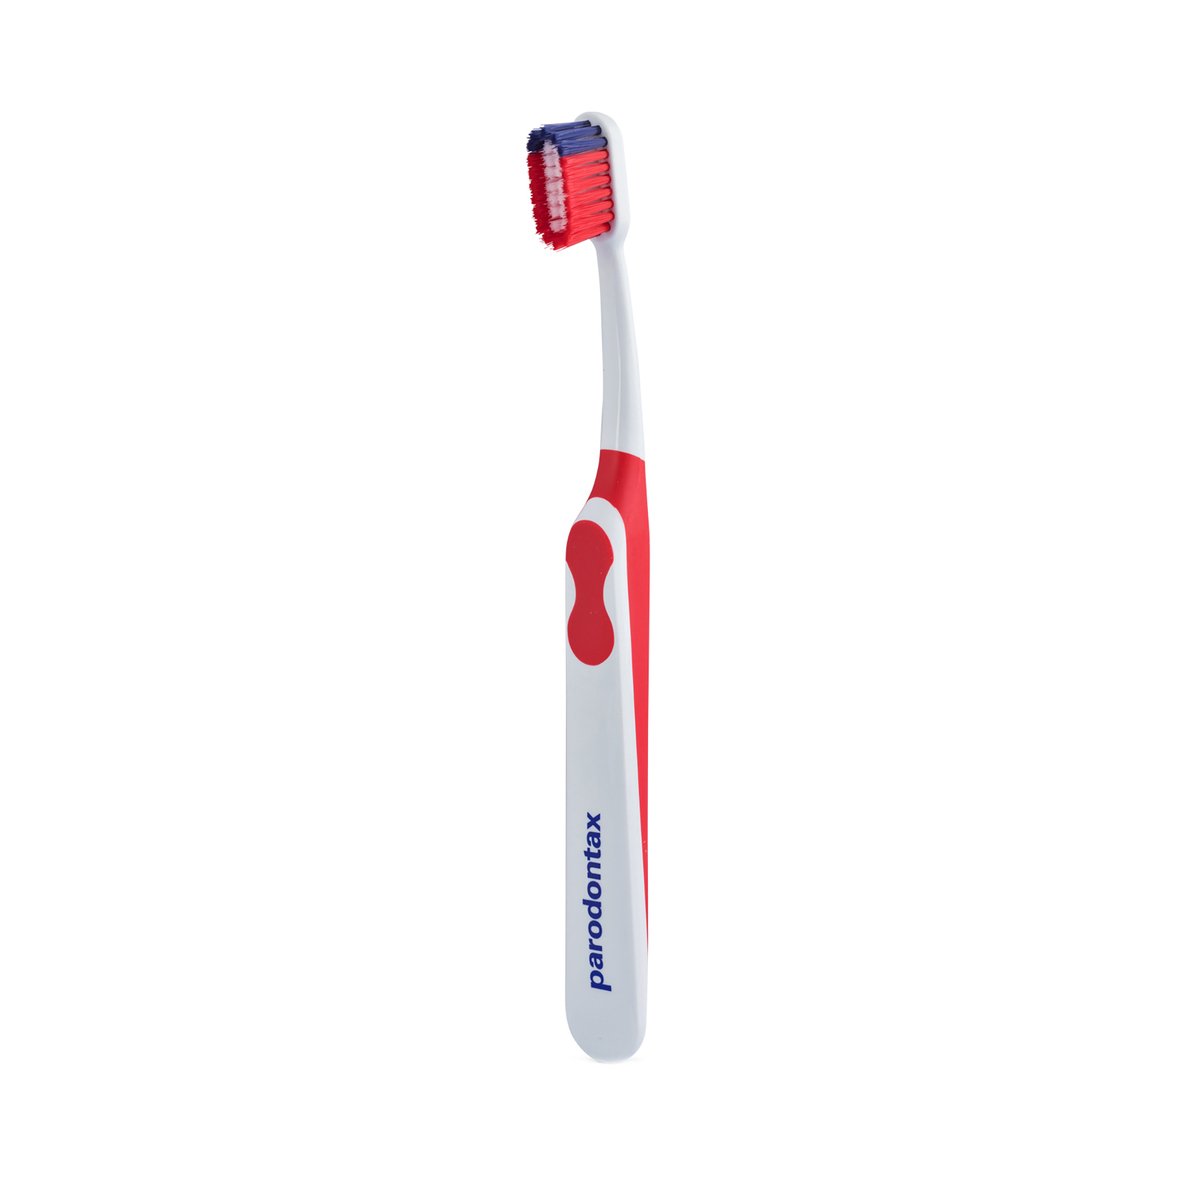 Parodontax Toothbrush Soft Assorted Color 1pc